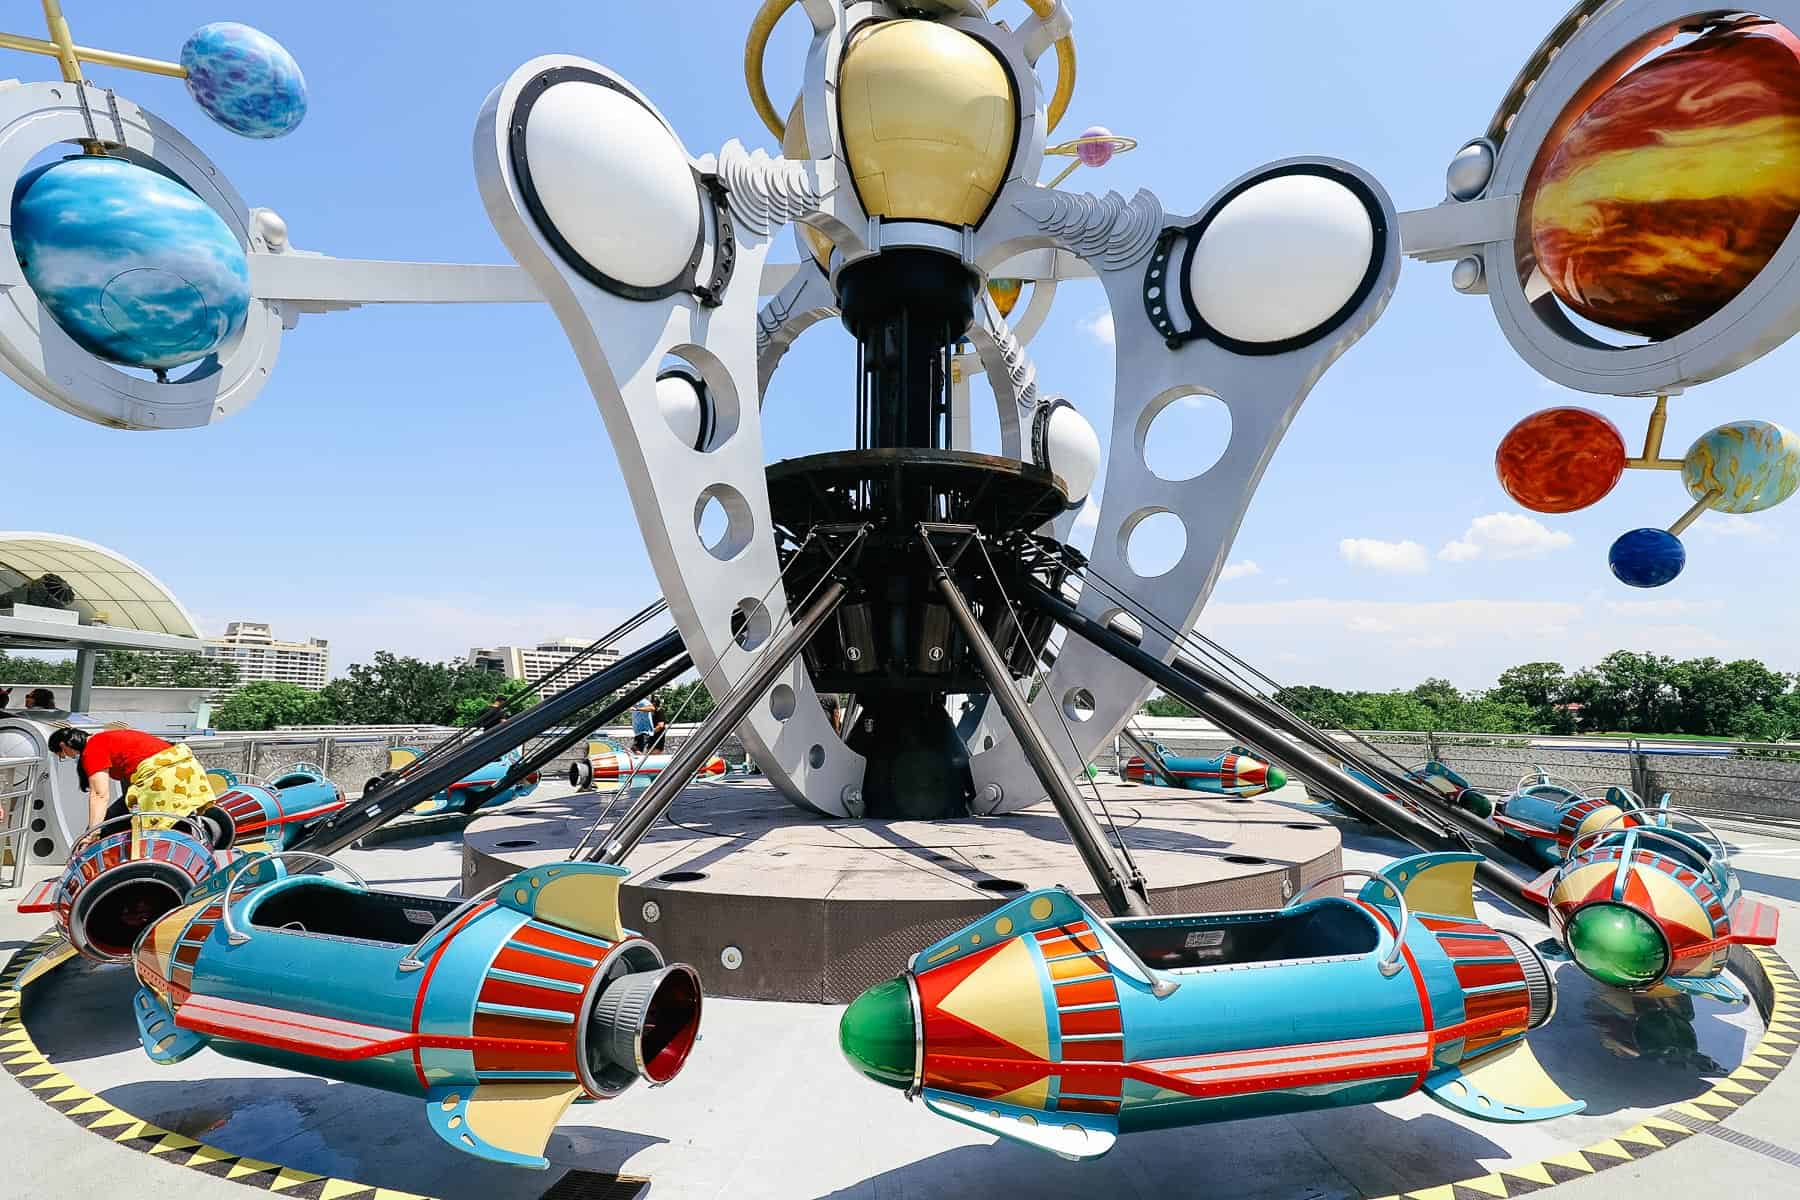 Astro Orbiter (A Spinning Attraction in Tomorrowland at Magic Kingdom)